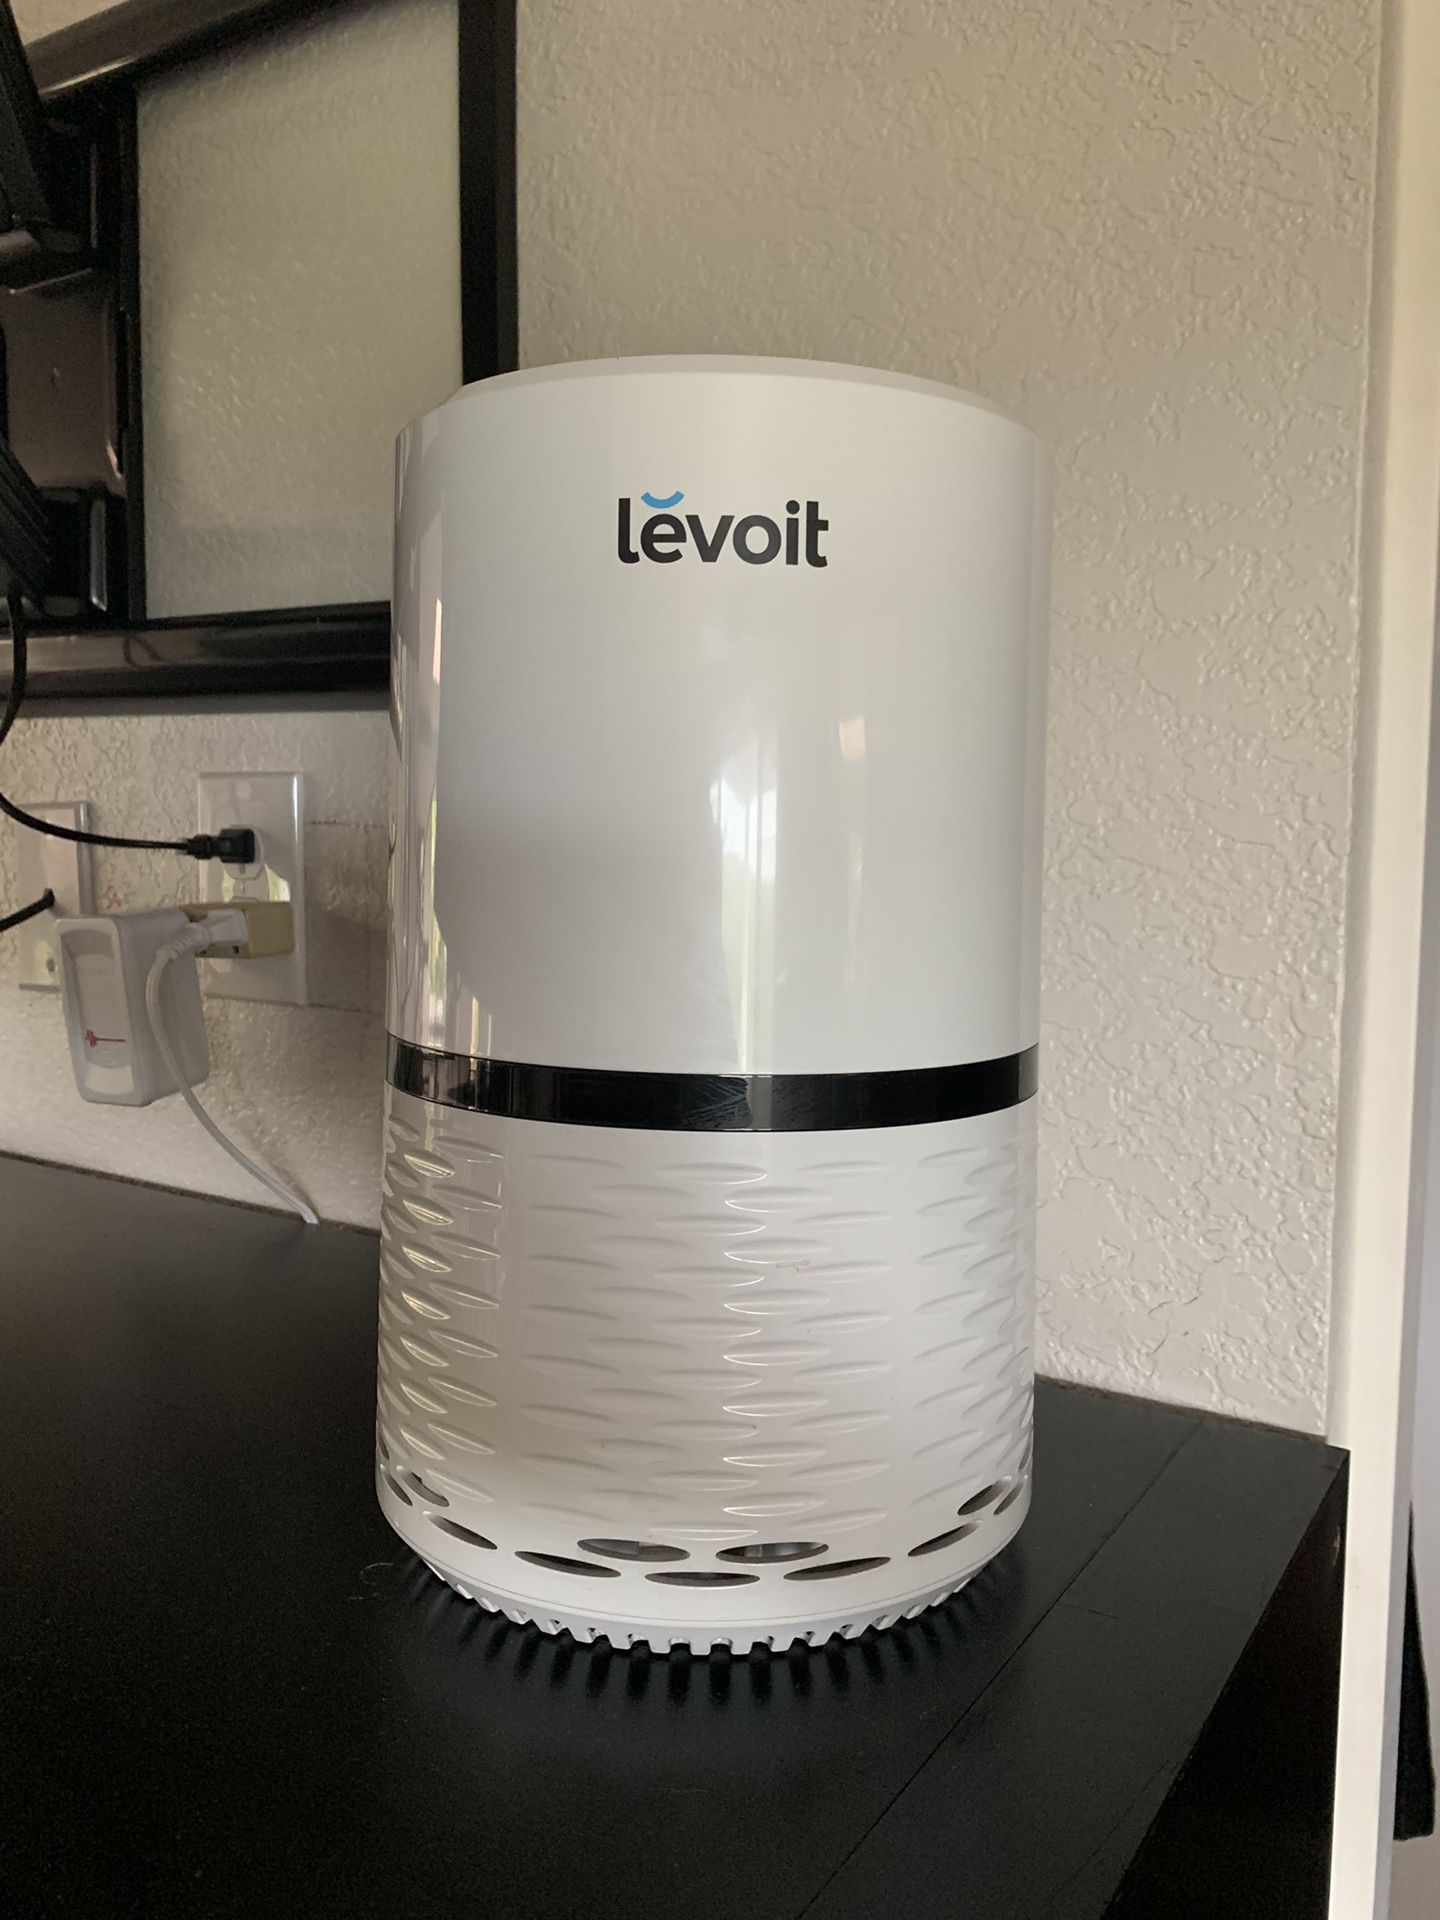 Levoit LV-H132 Air Purifier with True Hepa Filter, Odor Allergies Eliminator or for Smokers, Smoke, etc.